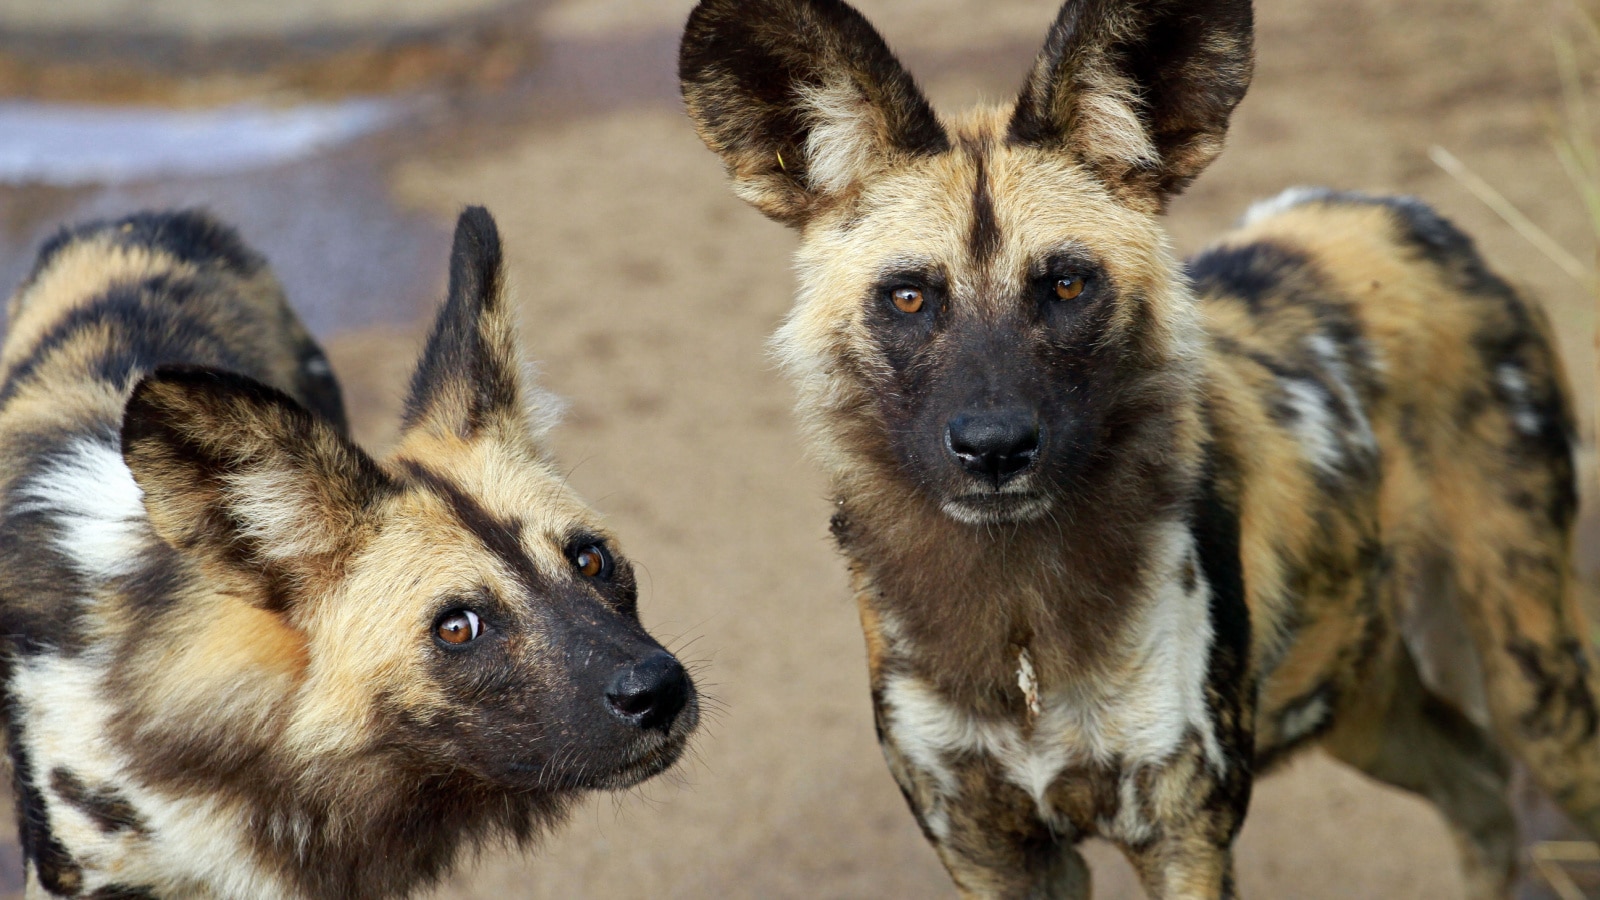 <p>Dogs are man's best friends for the patting, curdling, and camaraderie. But not the African wild dogs. They are vicious, and you should not mistake them for your domestic pals when you vacay.</p>